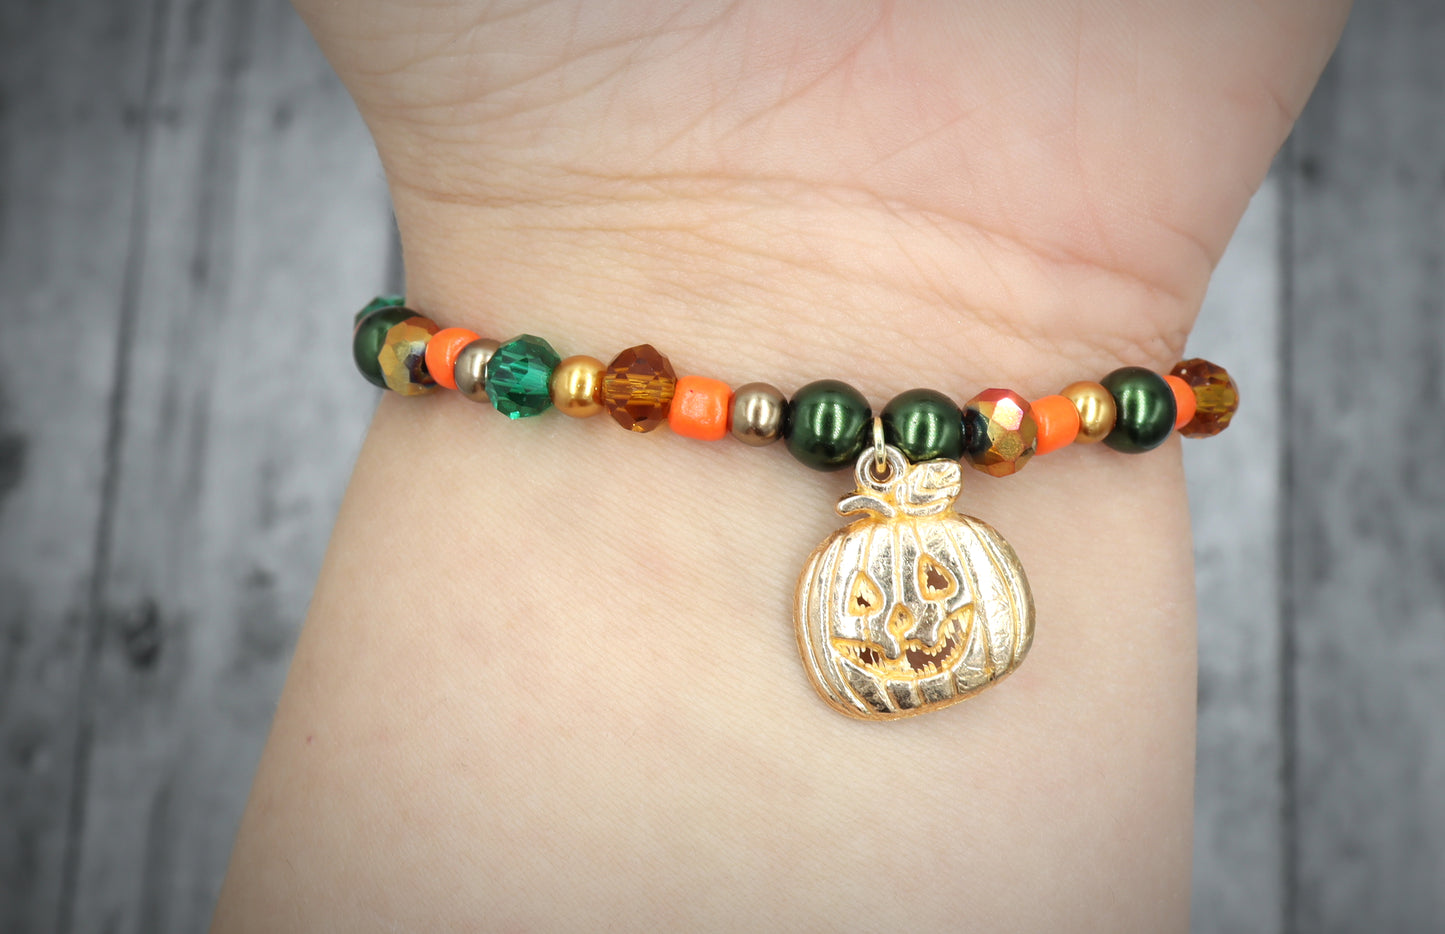 Crave Away the Night in The Pumpkin Patch Bracelet with Yellow Gold Pumpkin Charm by Monkey's Mojo